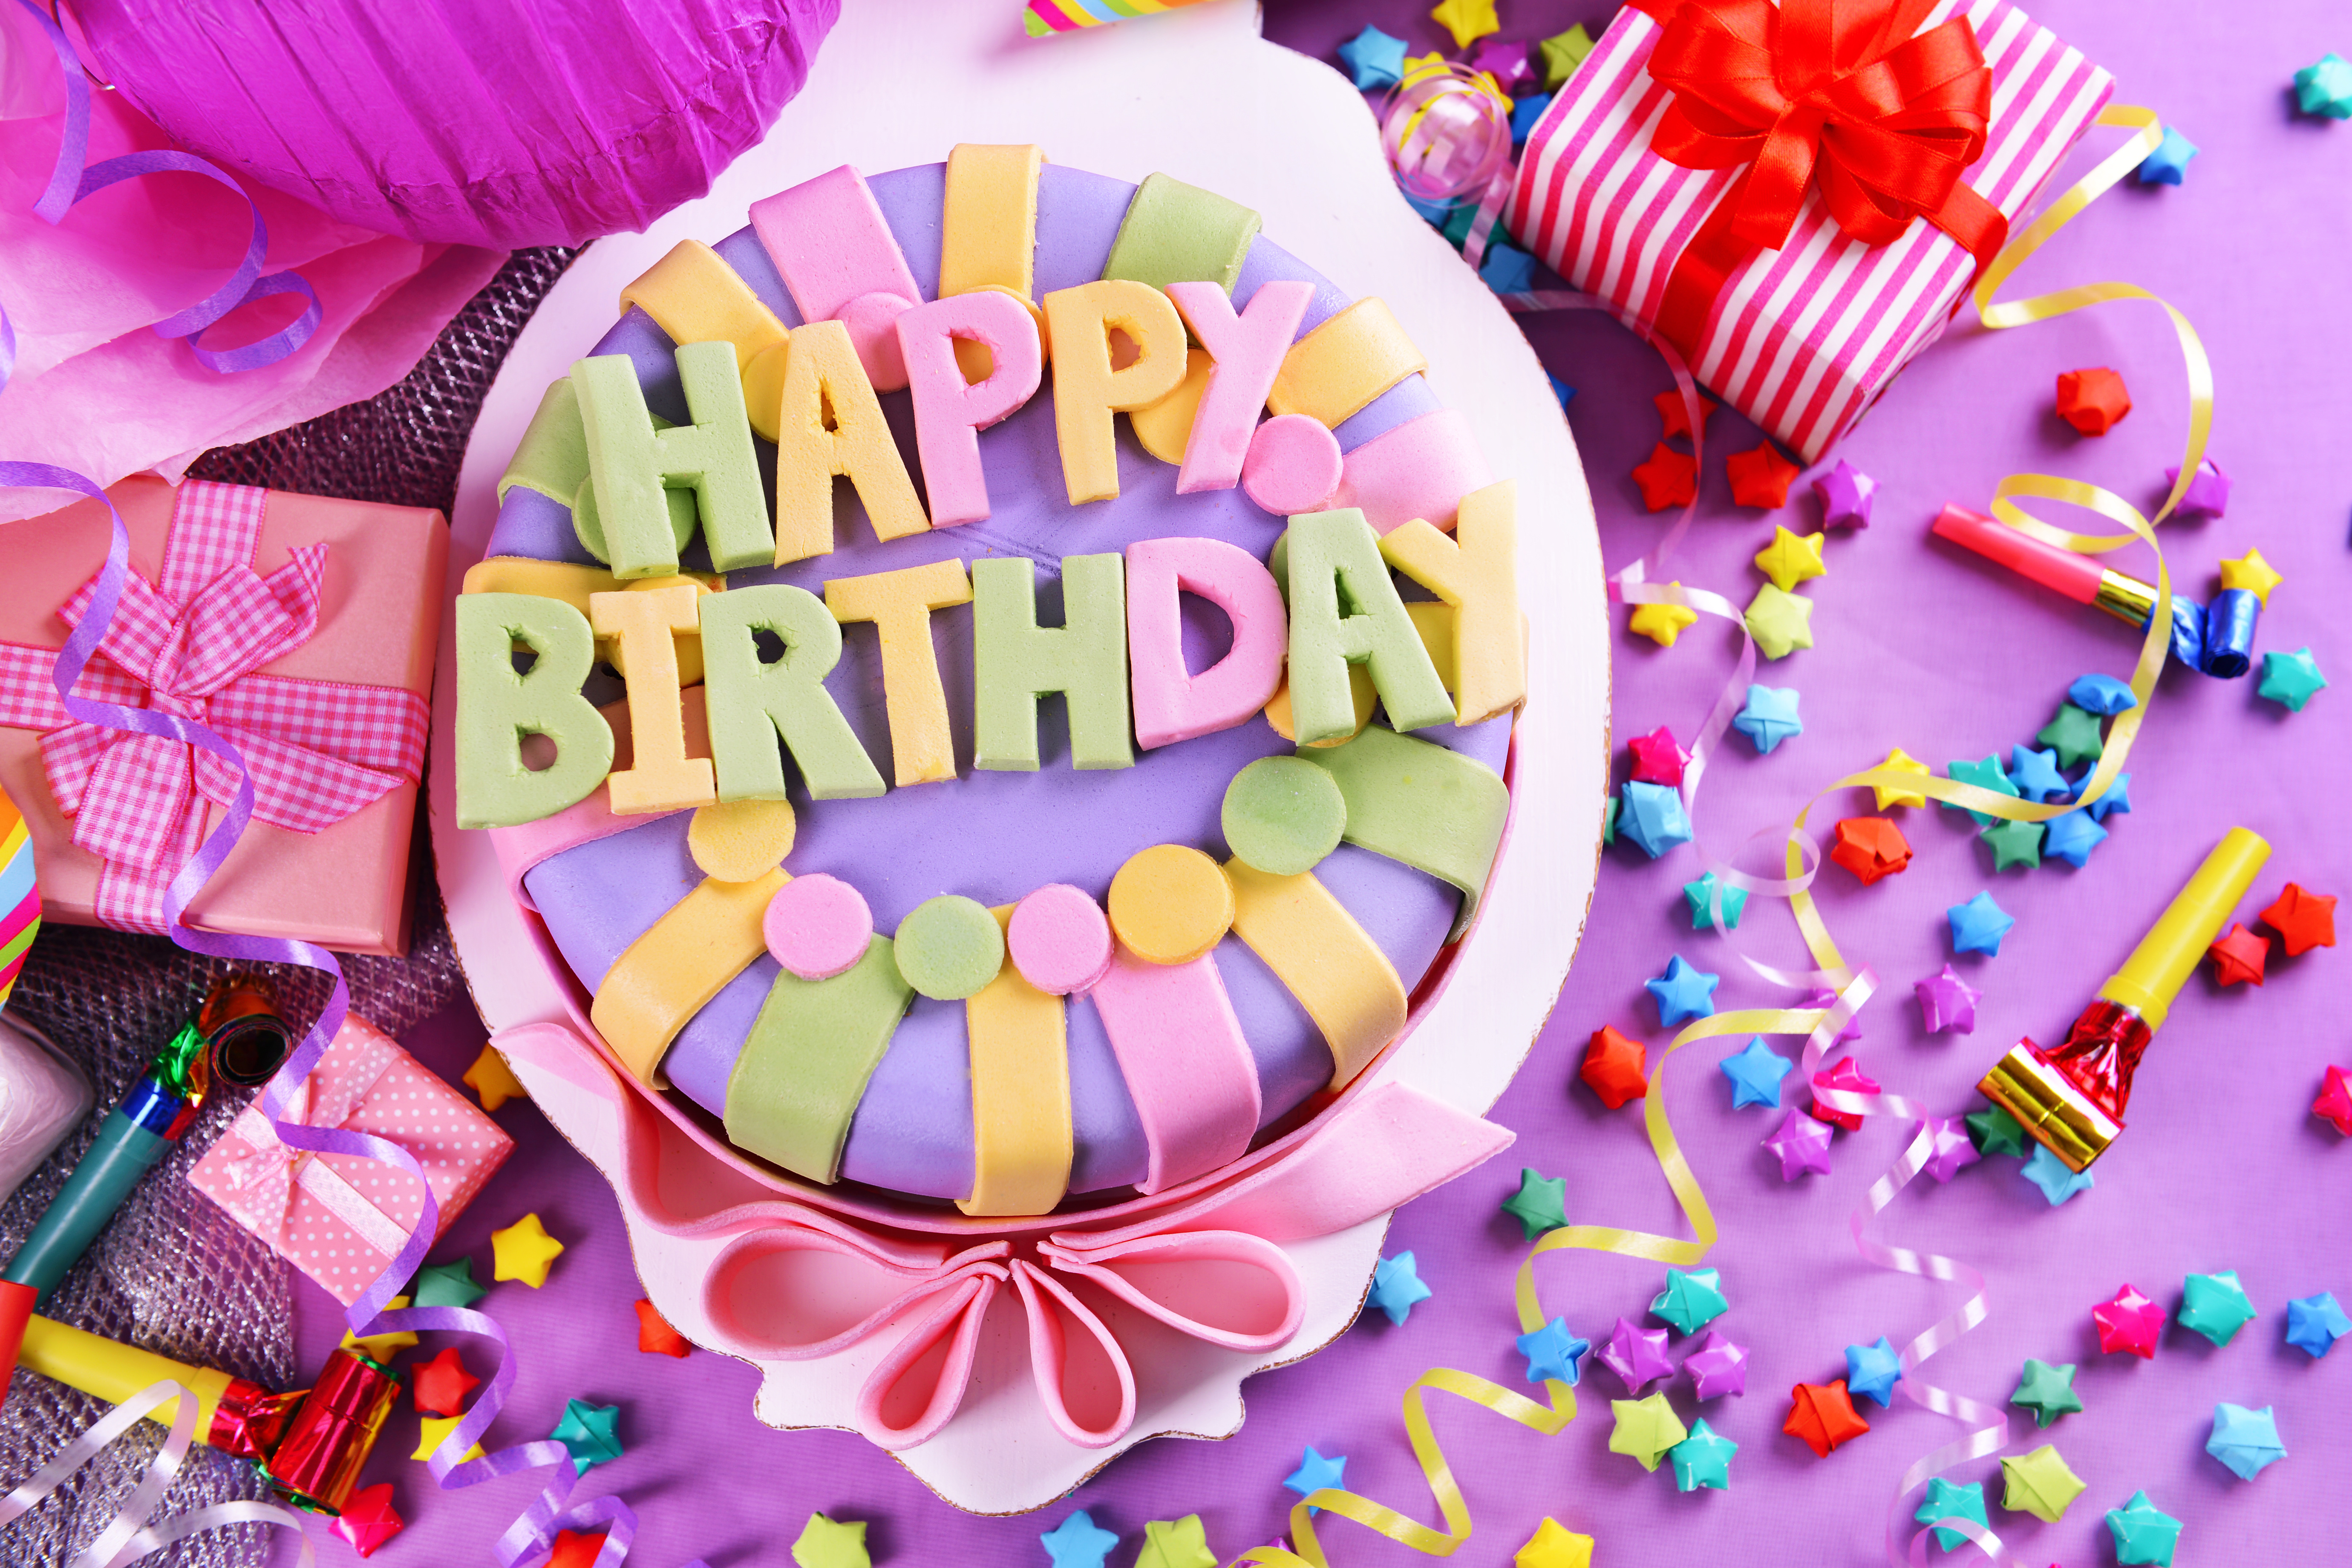 Tablet - Cake Happy Birthday 4k , HD Wallpaper & Backgrounds